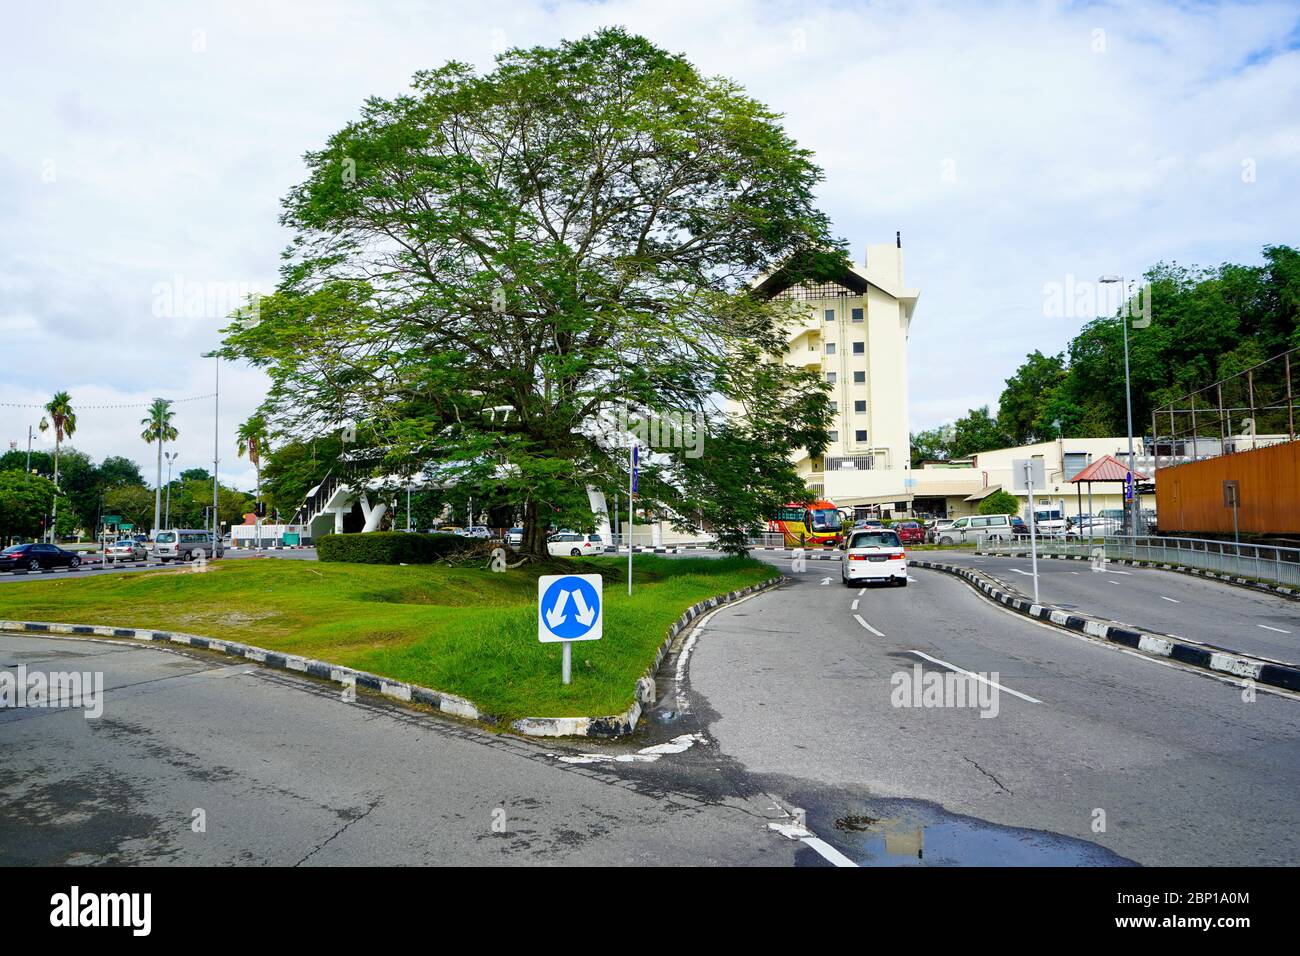 Road sign, marks and beautiful tree of Bandar Seri Begawan in Brunei, the smallest country in Asia Pacific region Stock Photo